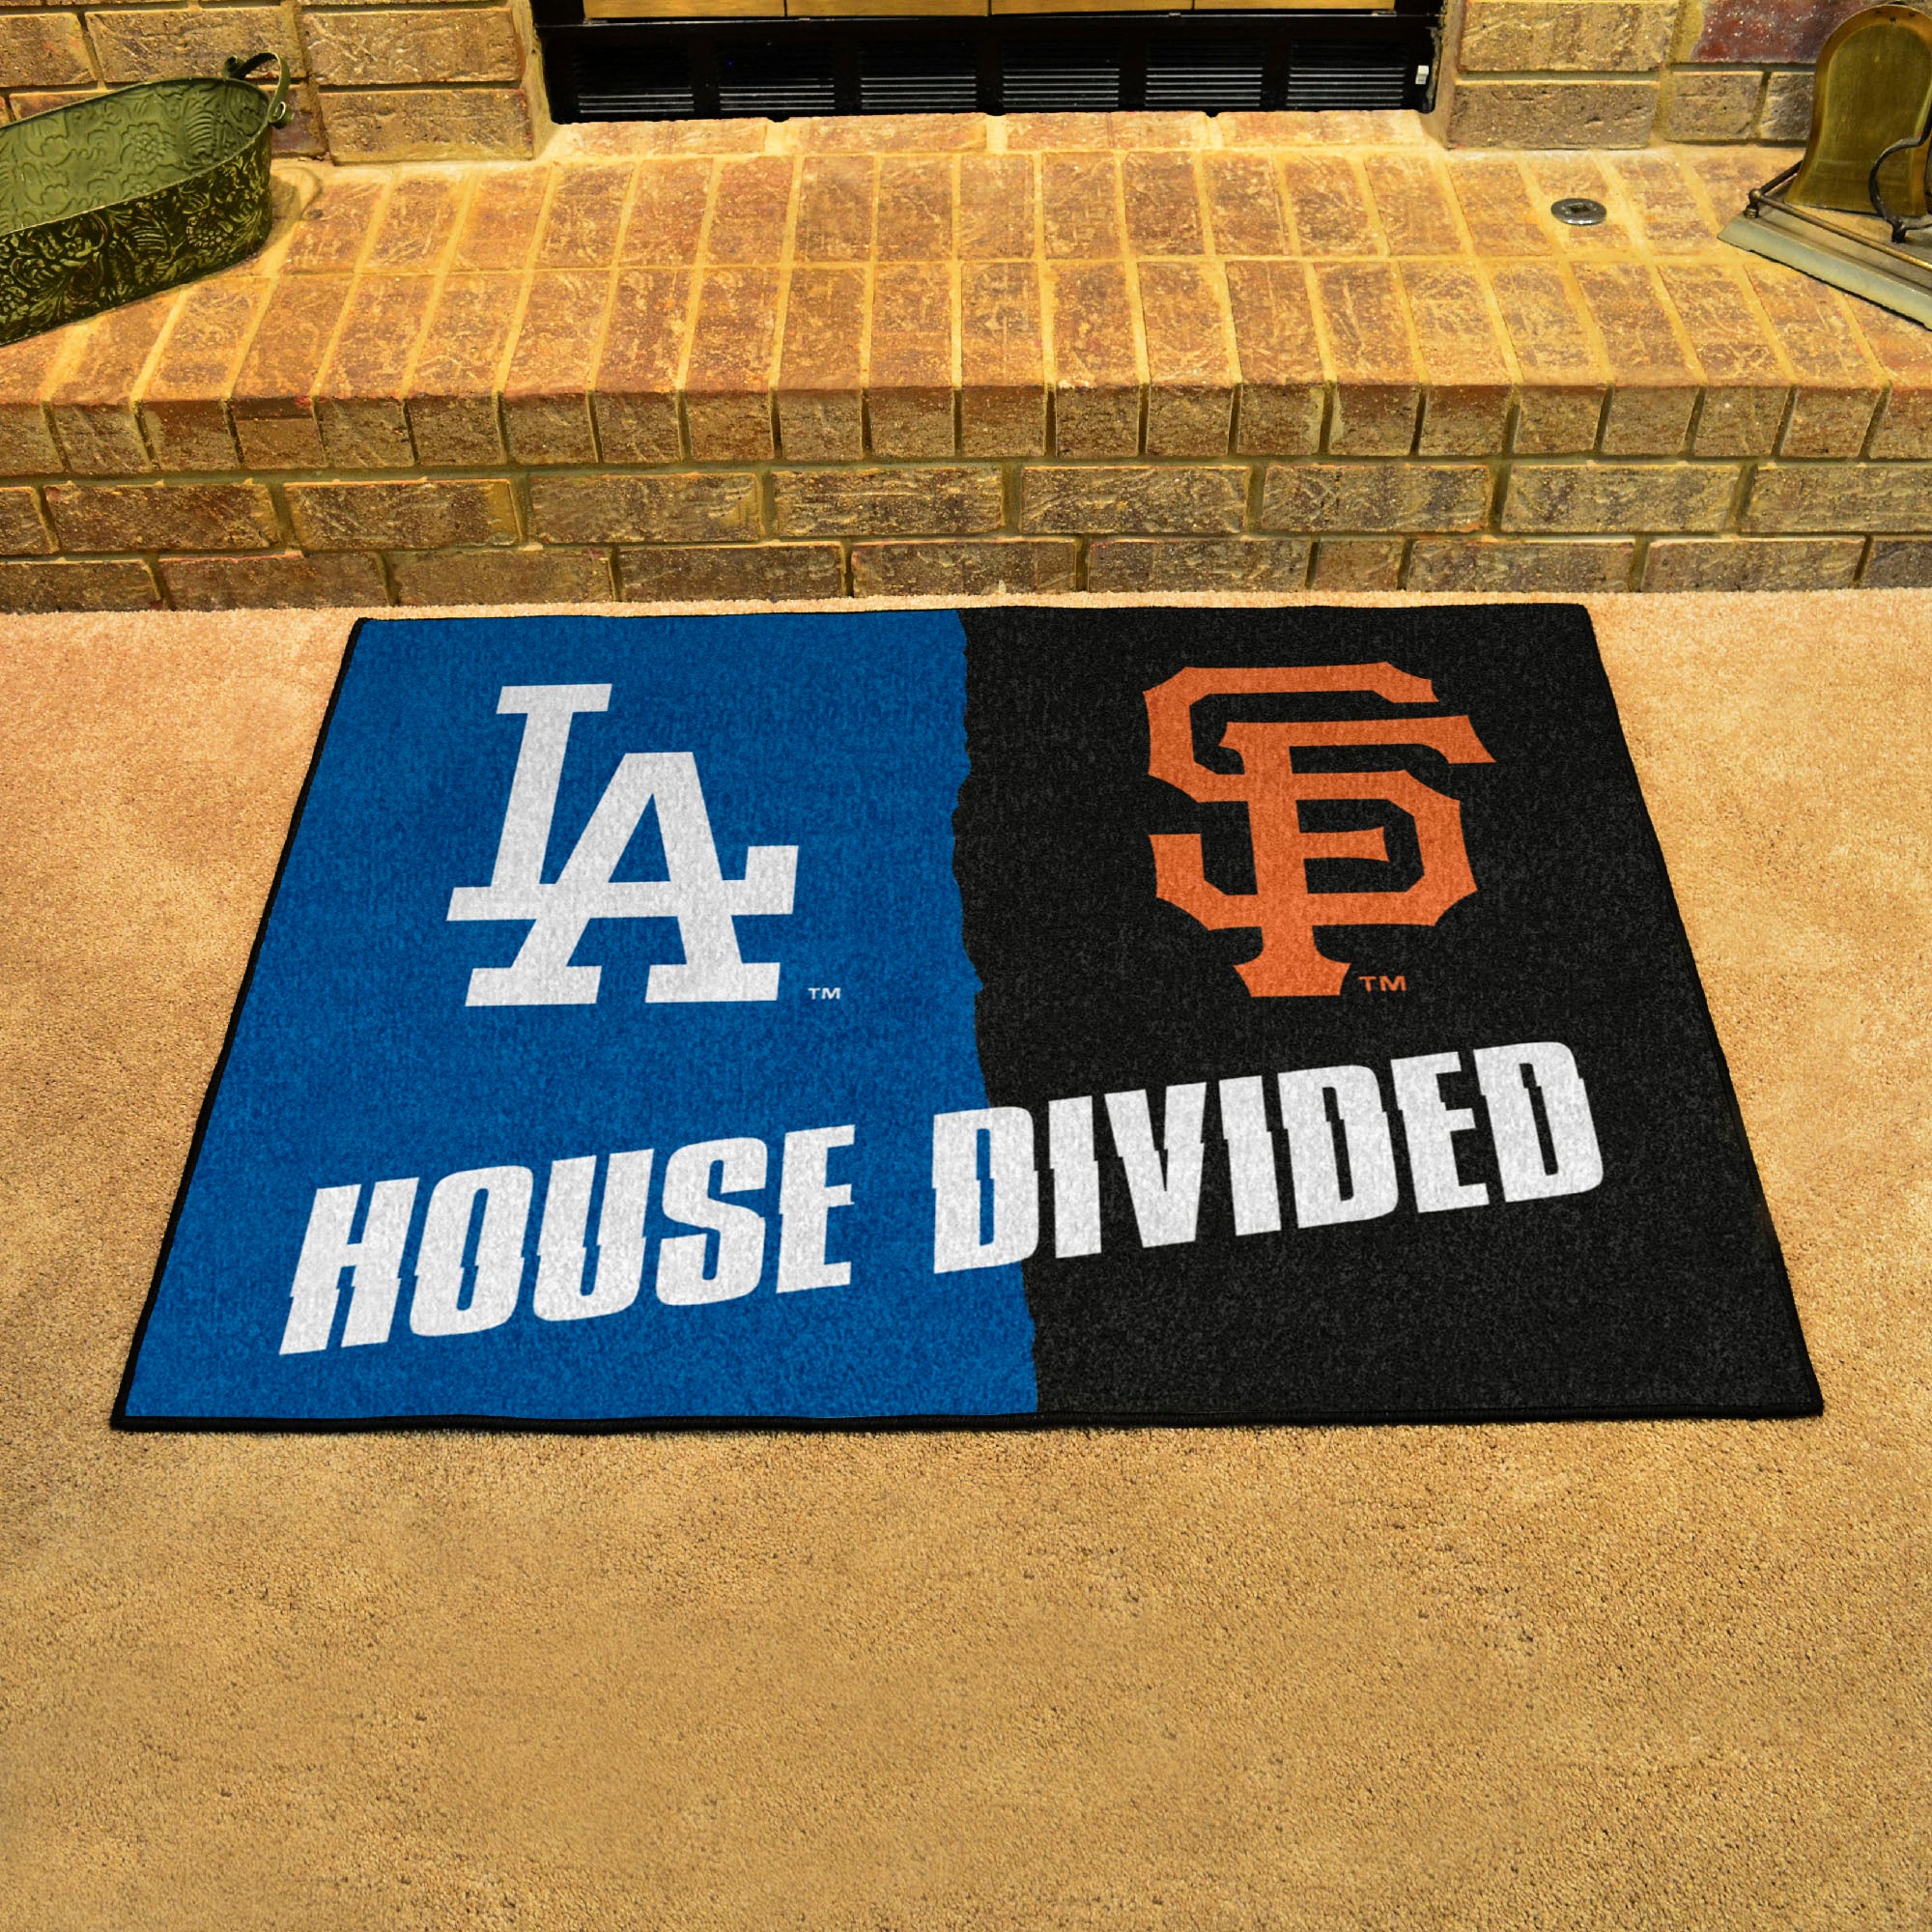 FANMATS, MLB House Divided - Dodgers / Giants House Divided Rug